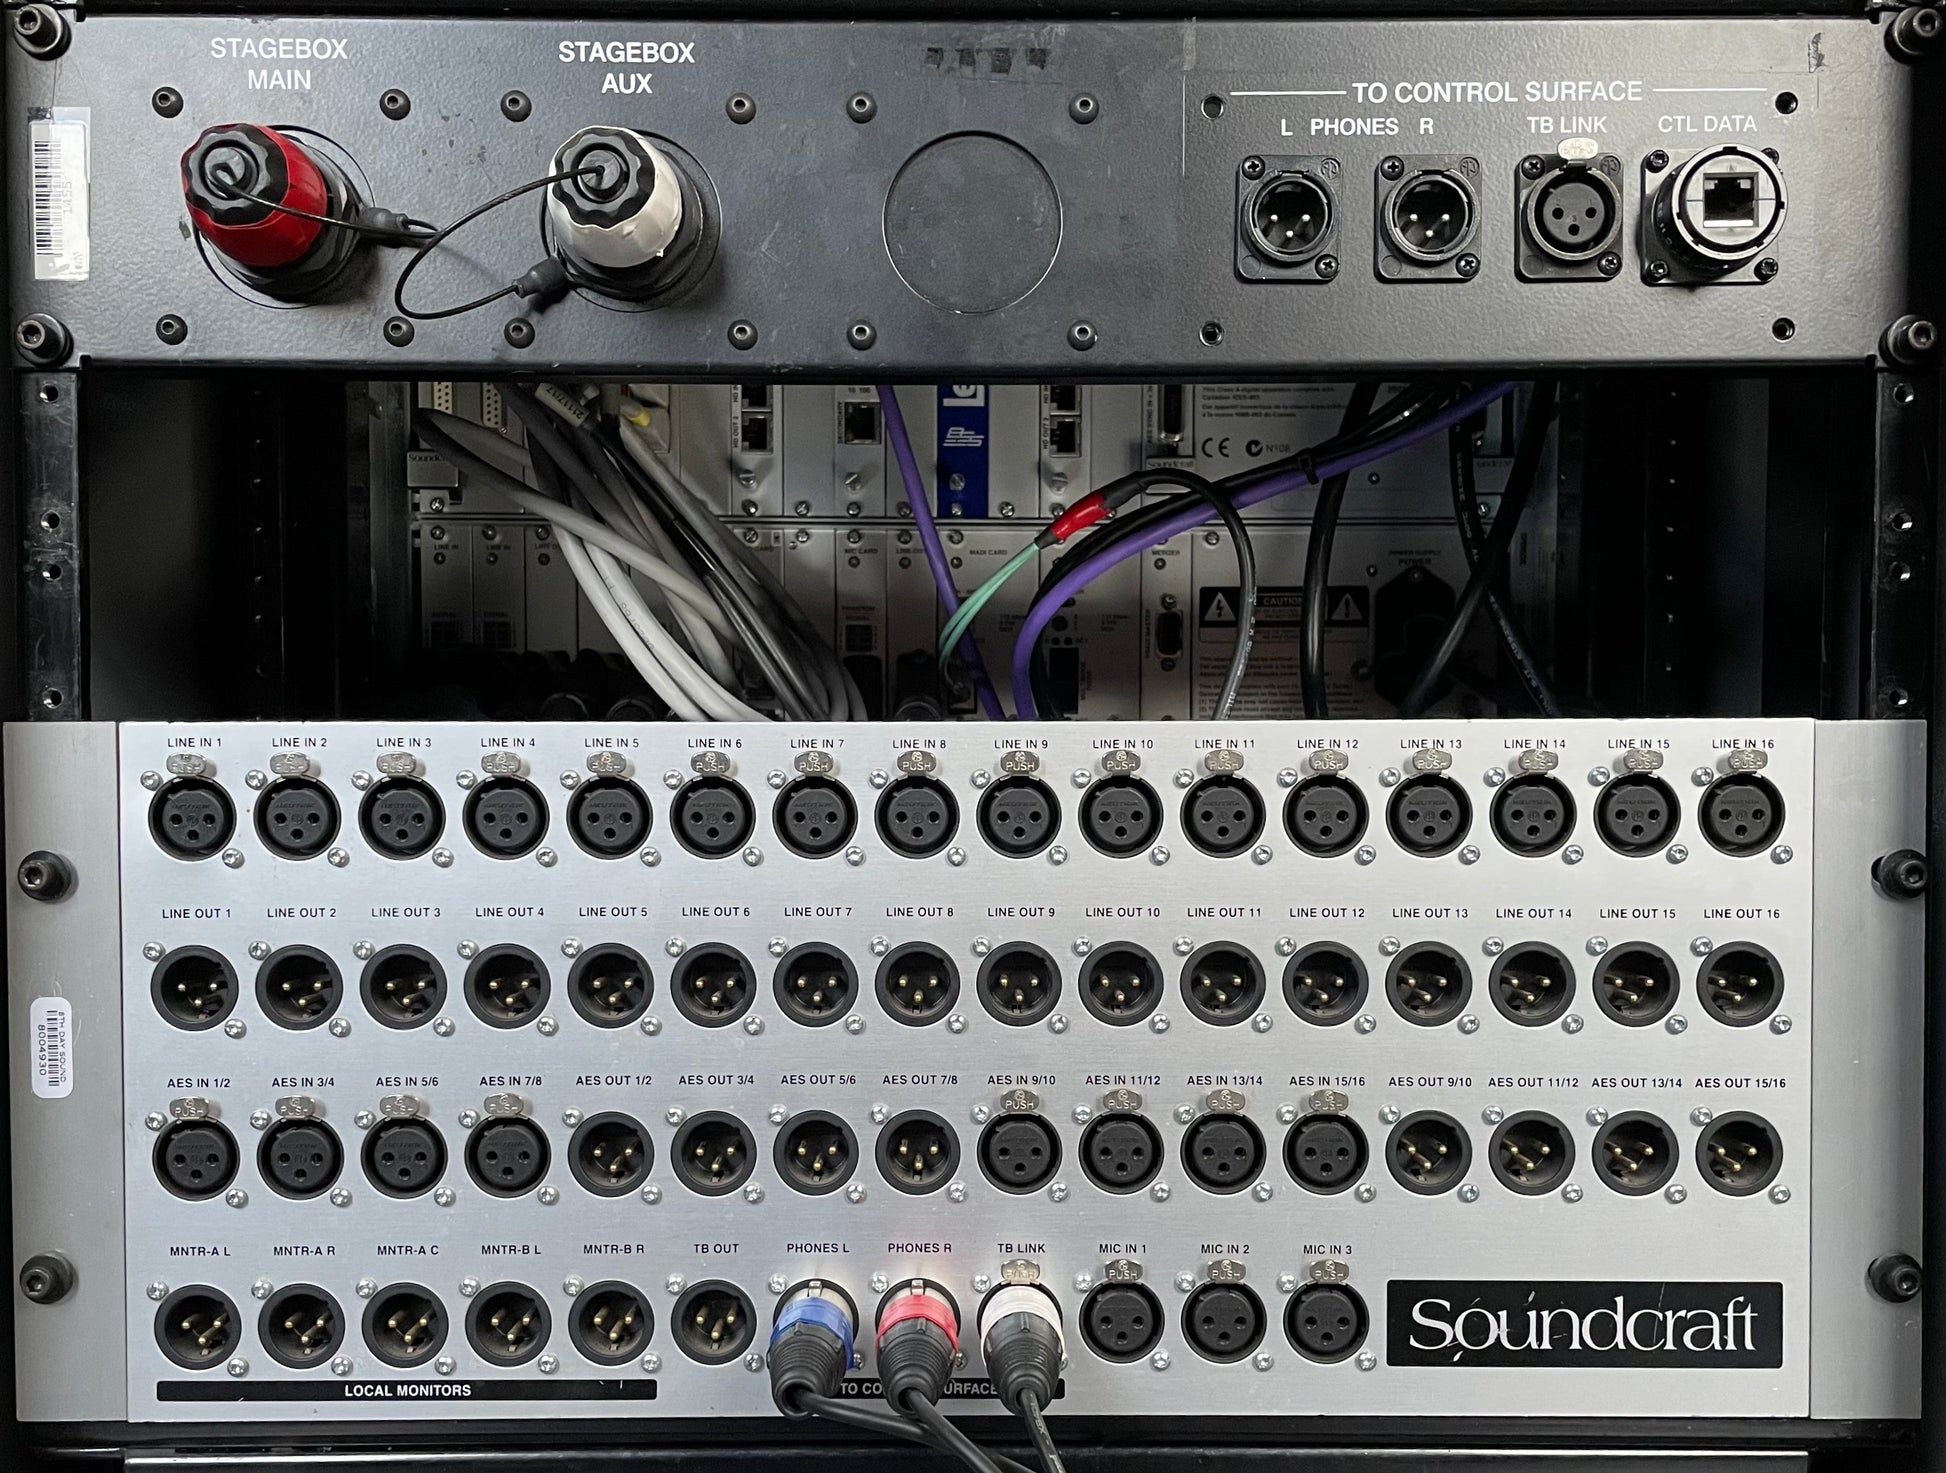 Used Soundcraft Vi6 System, 32 In 32 Out, With Touring Case for Sale. We Sell Professional Audio Equipment. Audio Systems, Amplifiers, Consoles, Mixers, Electronics, Entertainment, Sound, Live.